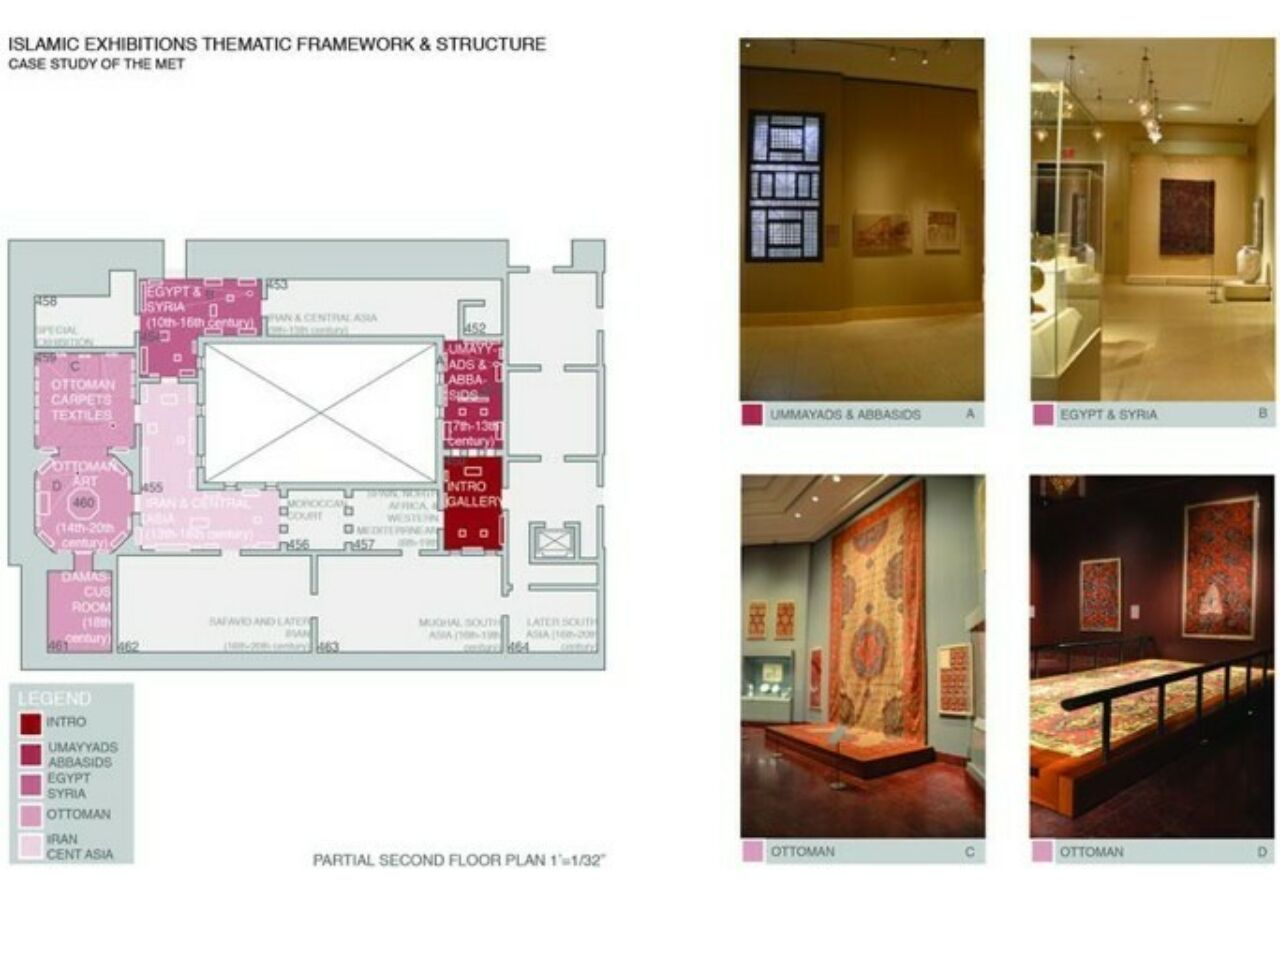 Colored floorplan and images highlighting Islamic exhibitions at the Metropolitan Museum; student thesis work.